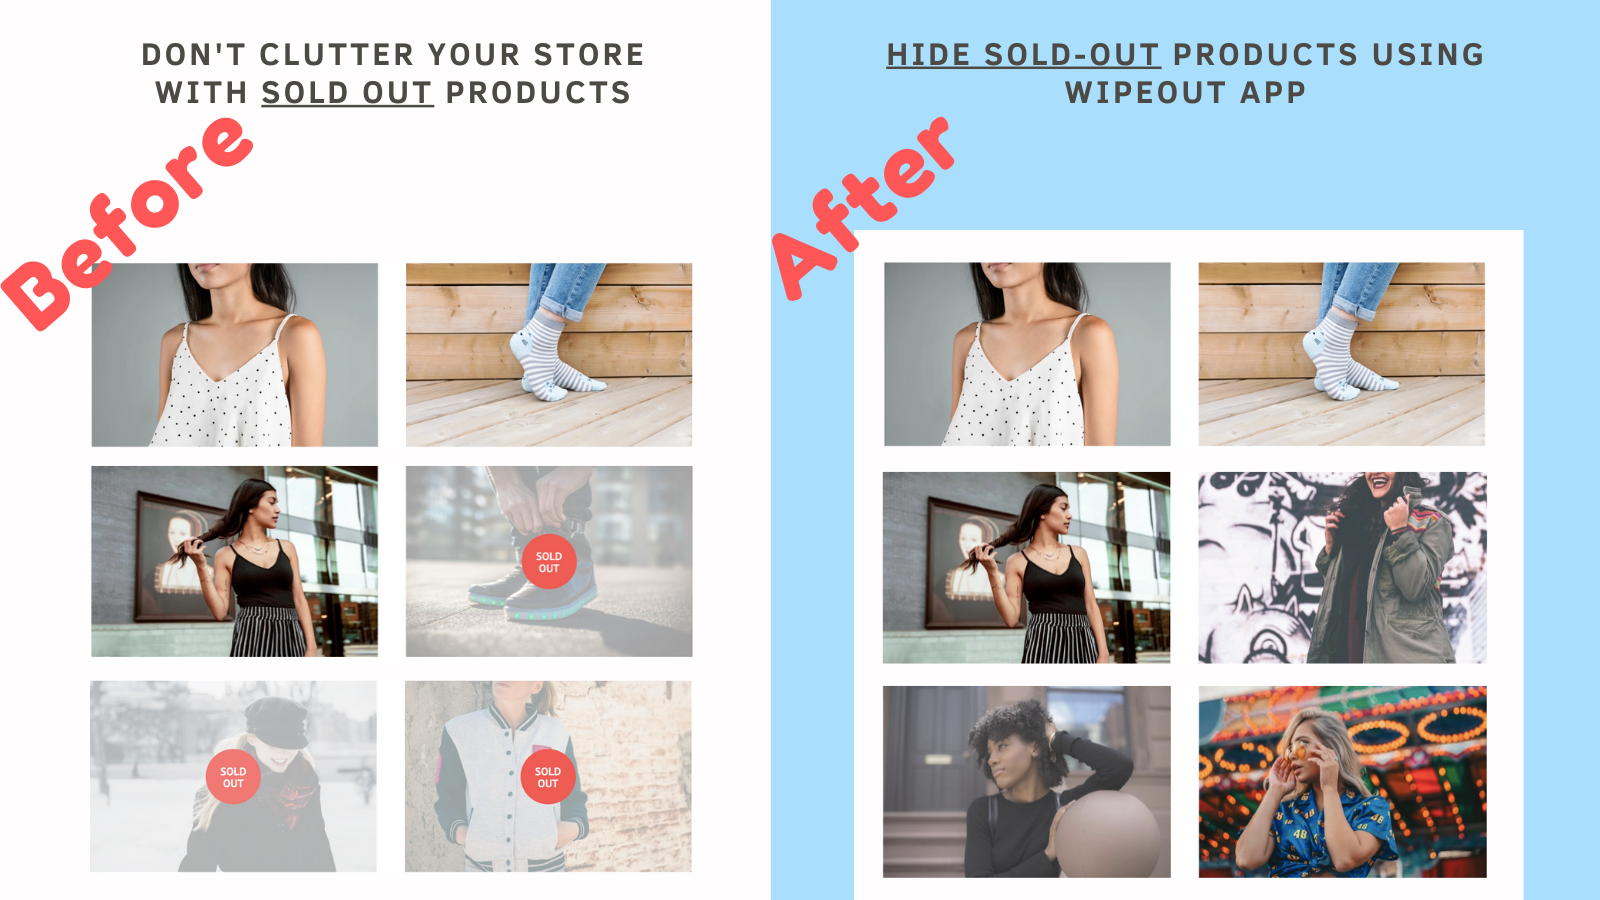 Hide sold out products using wipeout shopify app